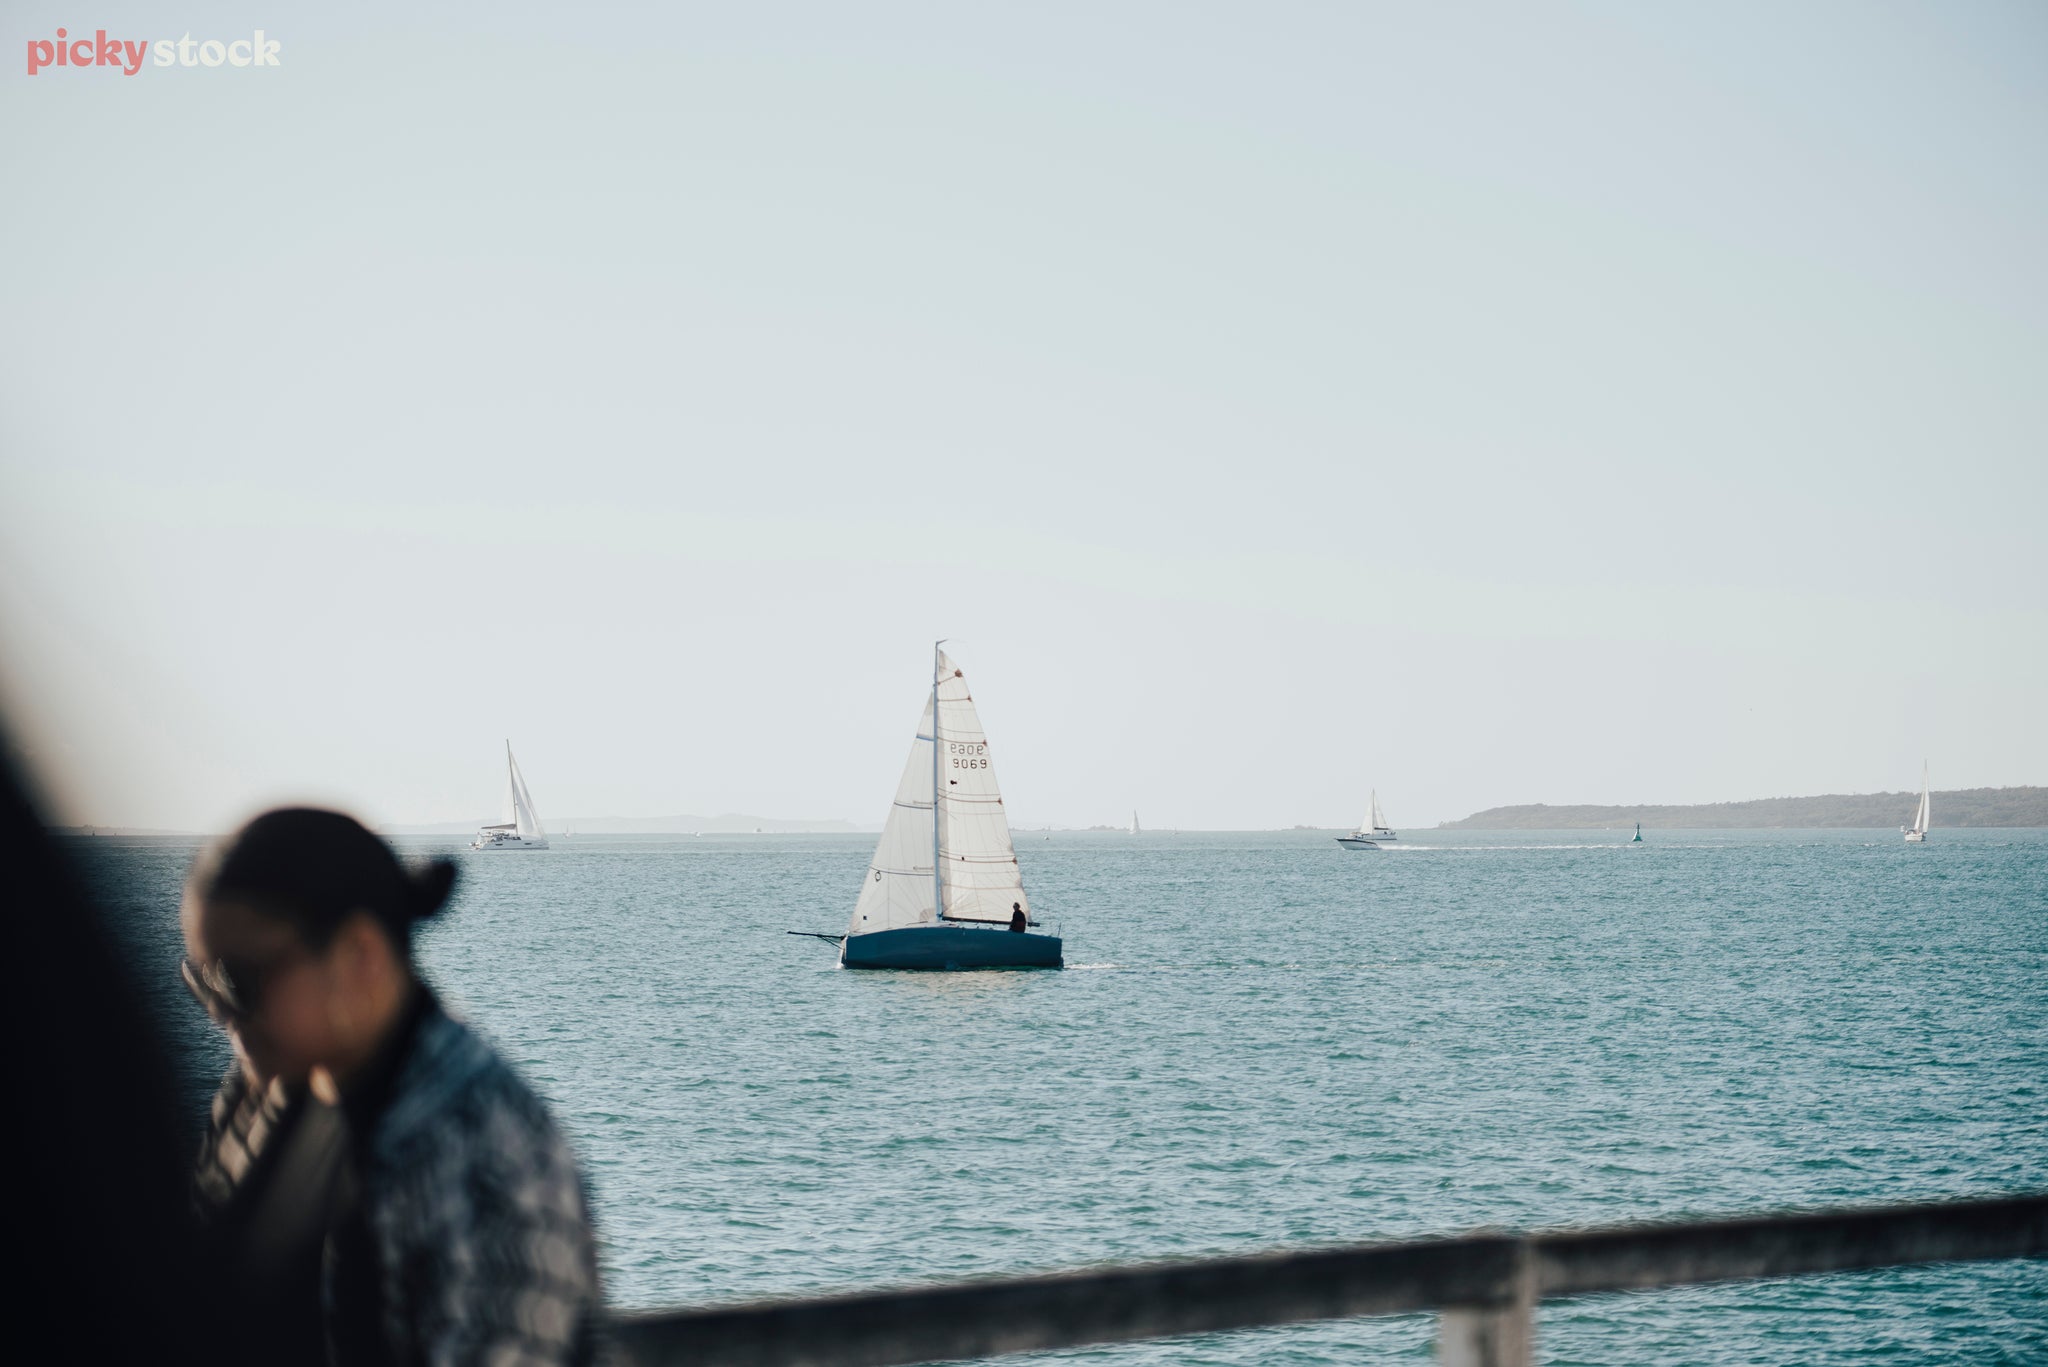 A cloudless light blue sky turns almost white at the horizon. In the distance on the left a finger of land sits on the water, around it small sail boats ply the waters of the Hauraki Gulf.
Closer to frame a lone sailboat catches the wind and as a single sailor guides it through the water. In the foreground is an out of focus woman and hand rail.